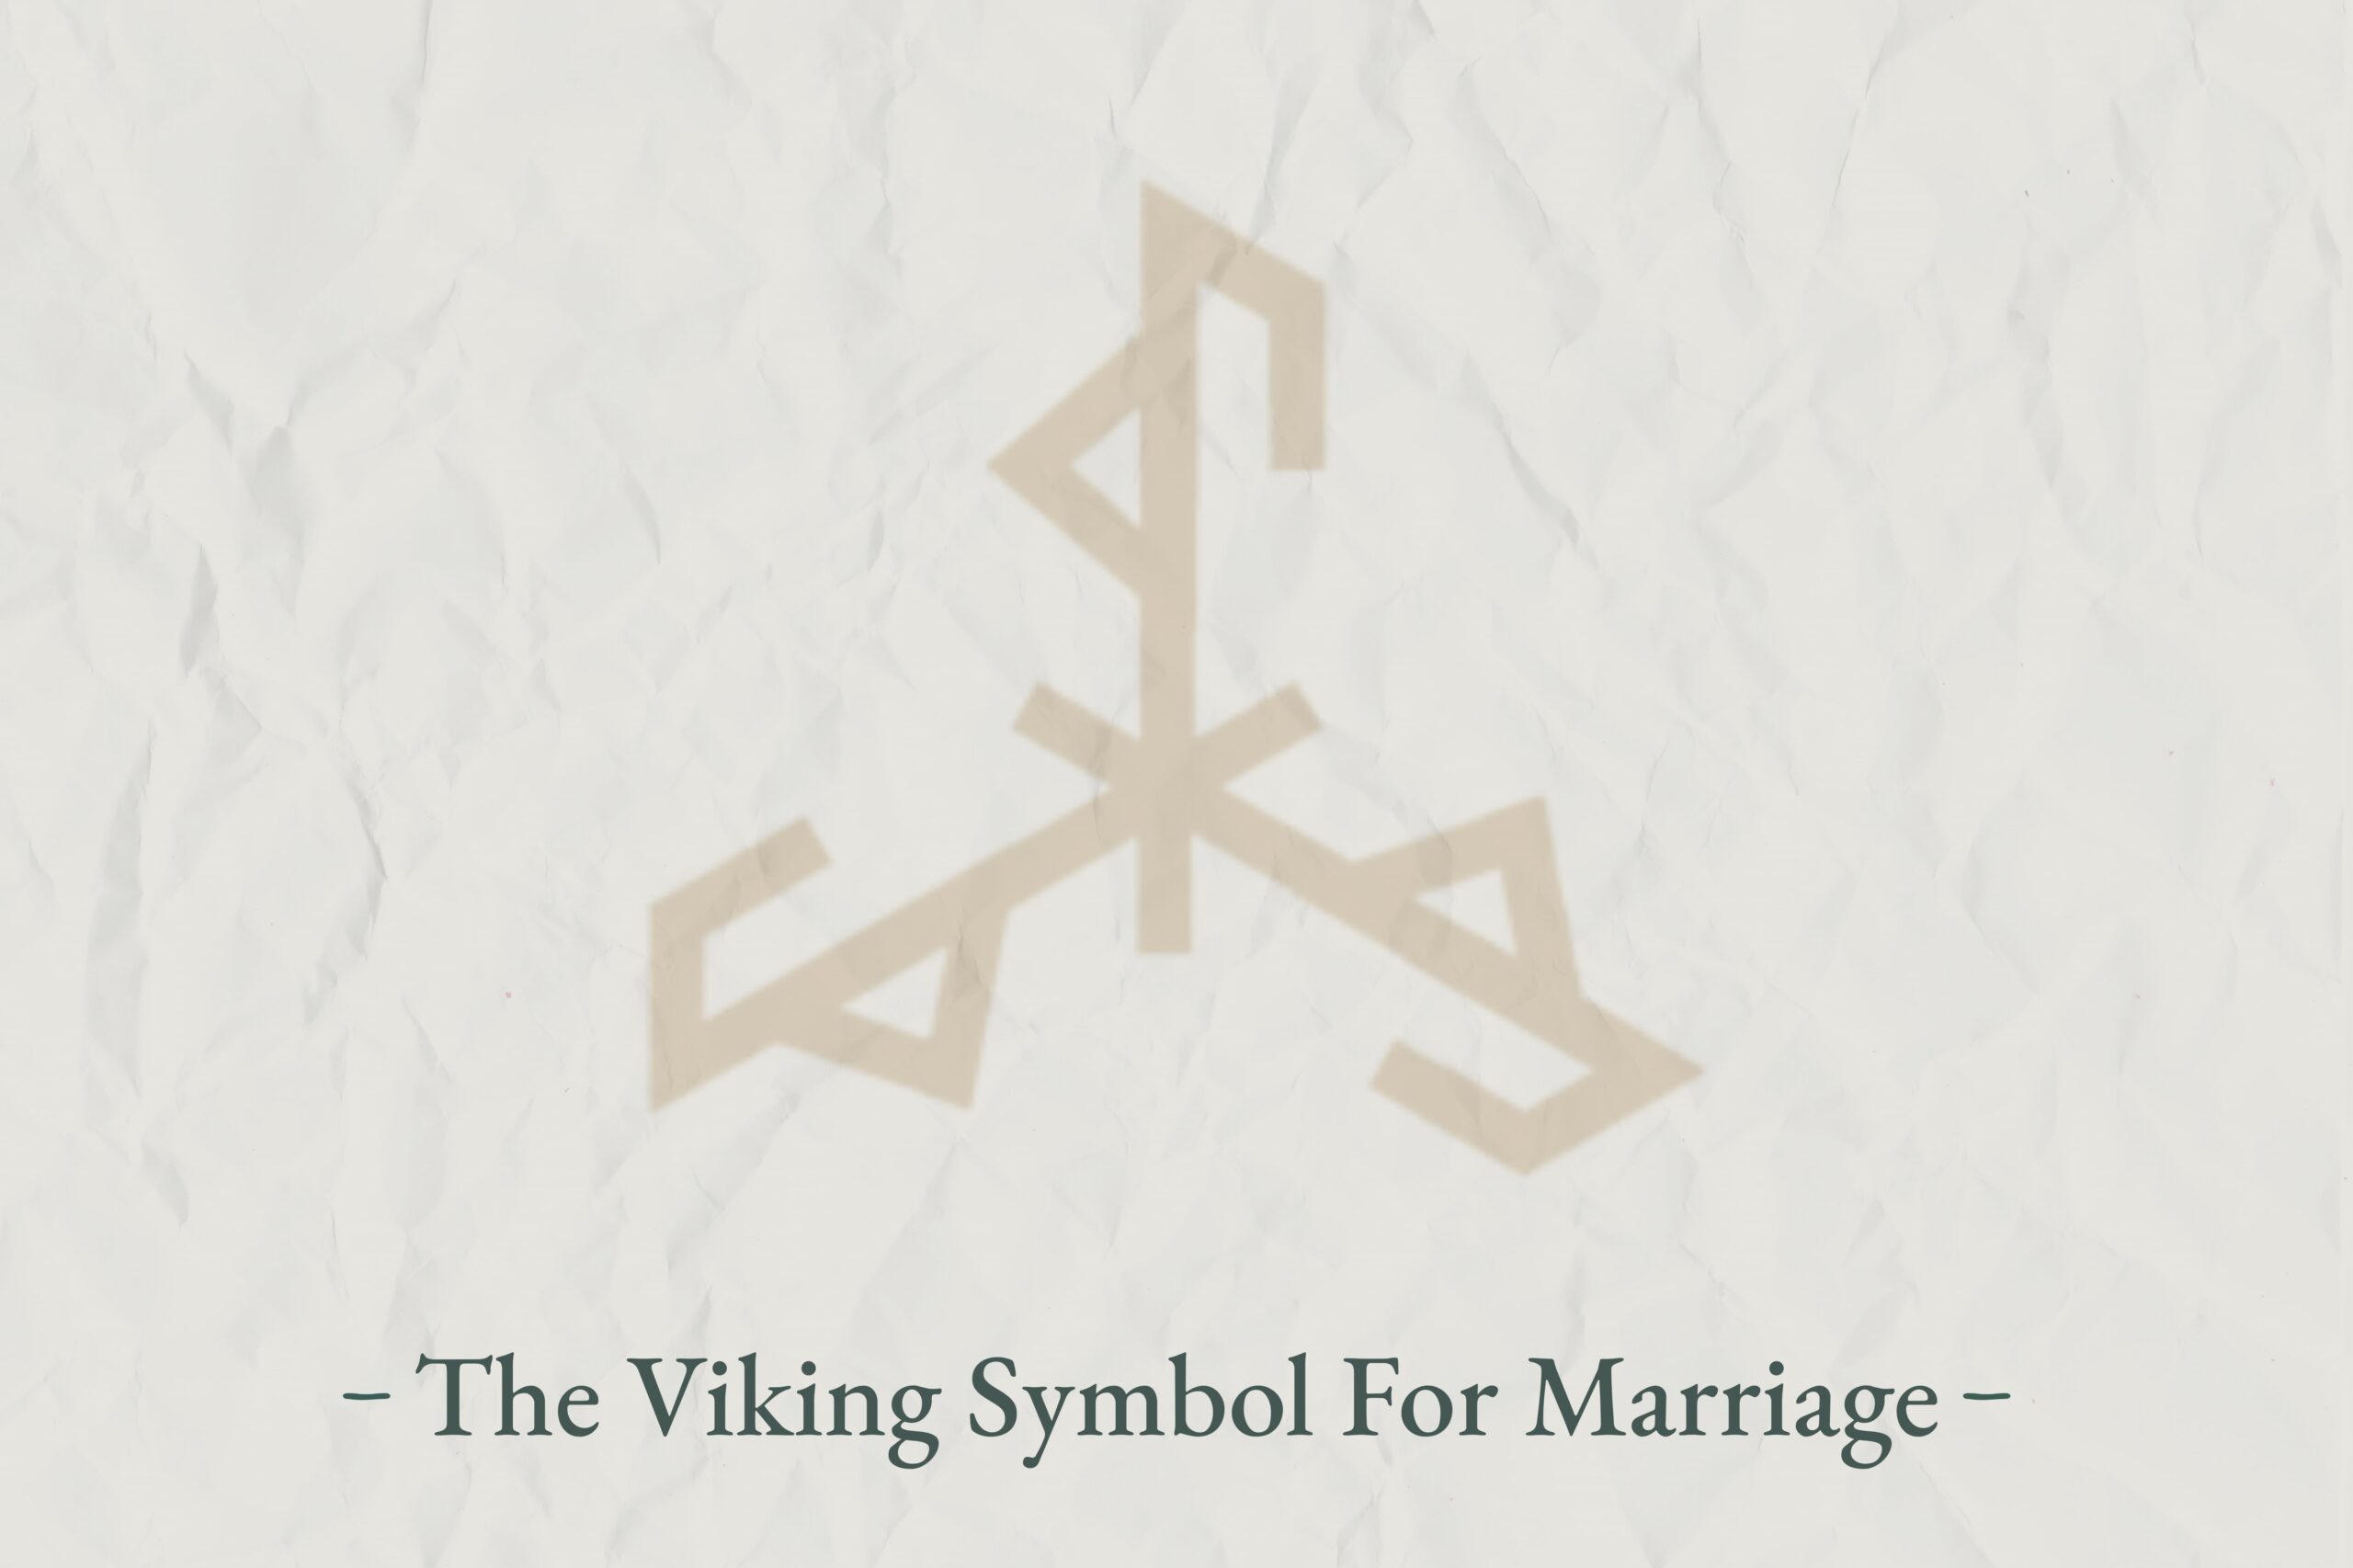 symbols of love and marriage